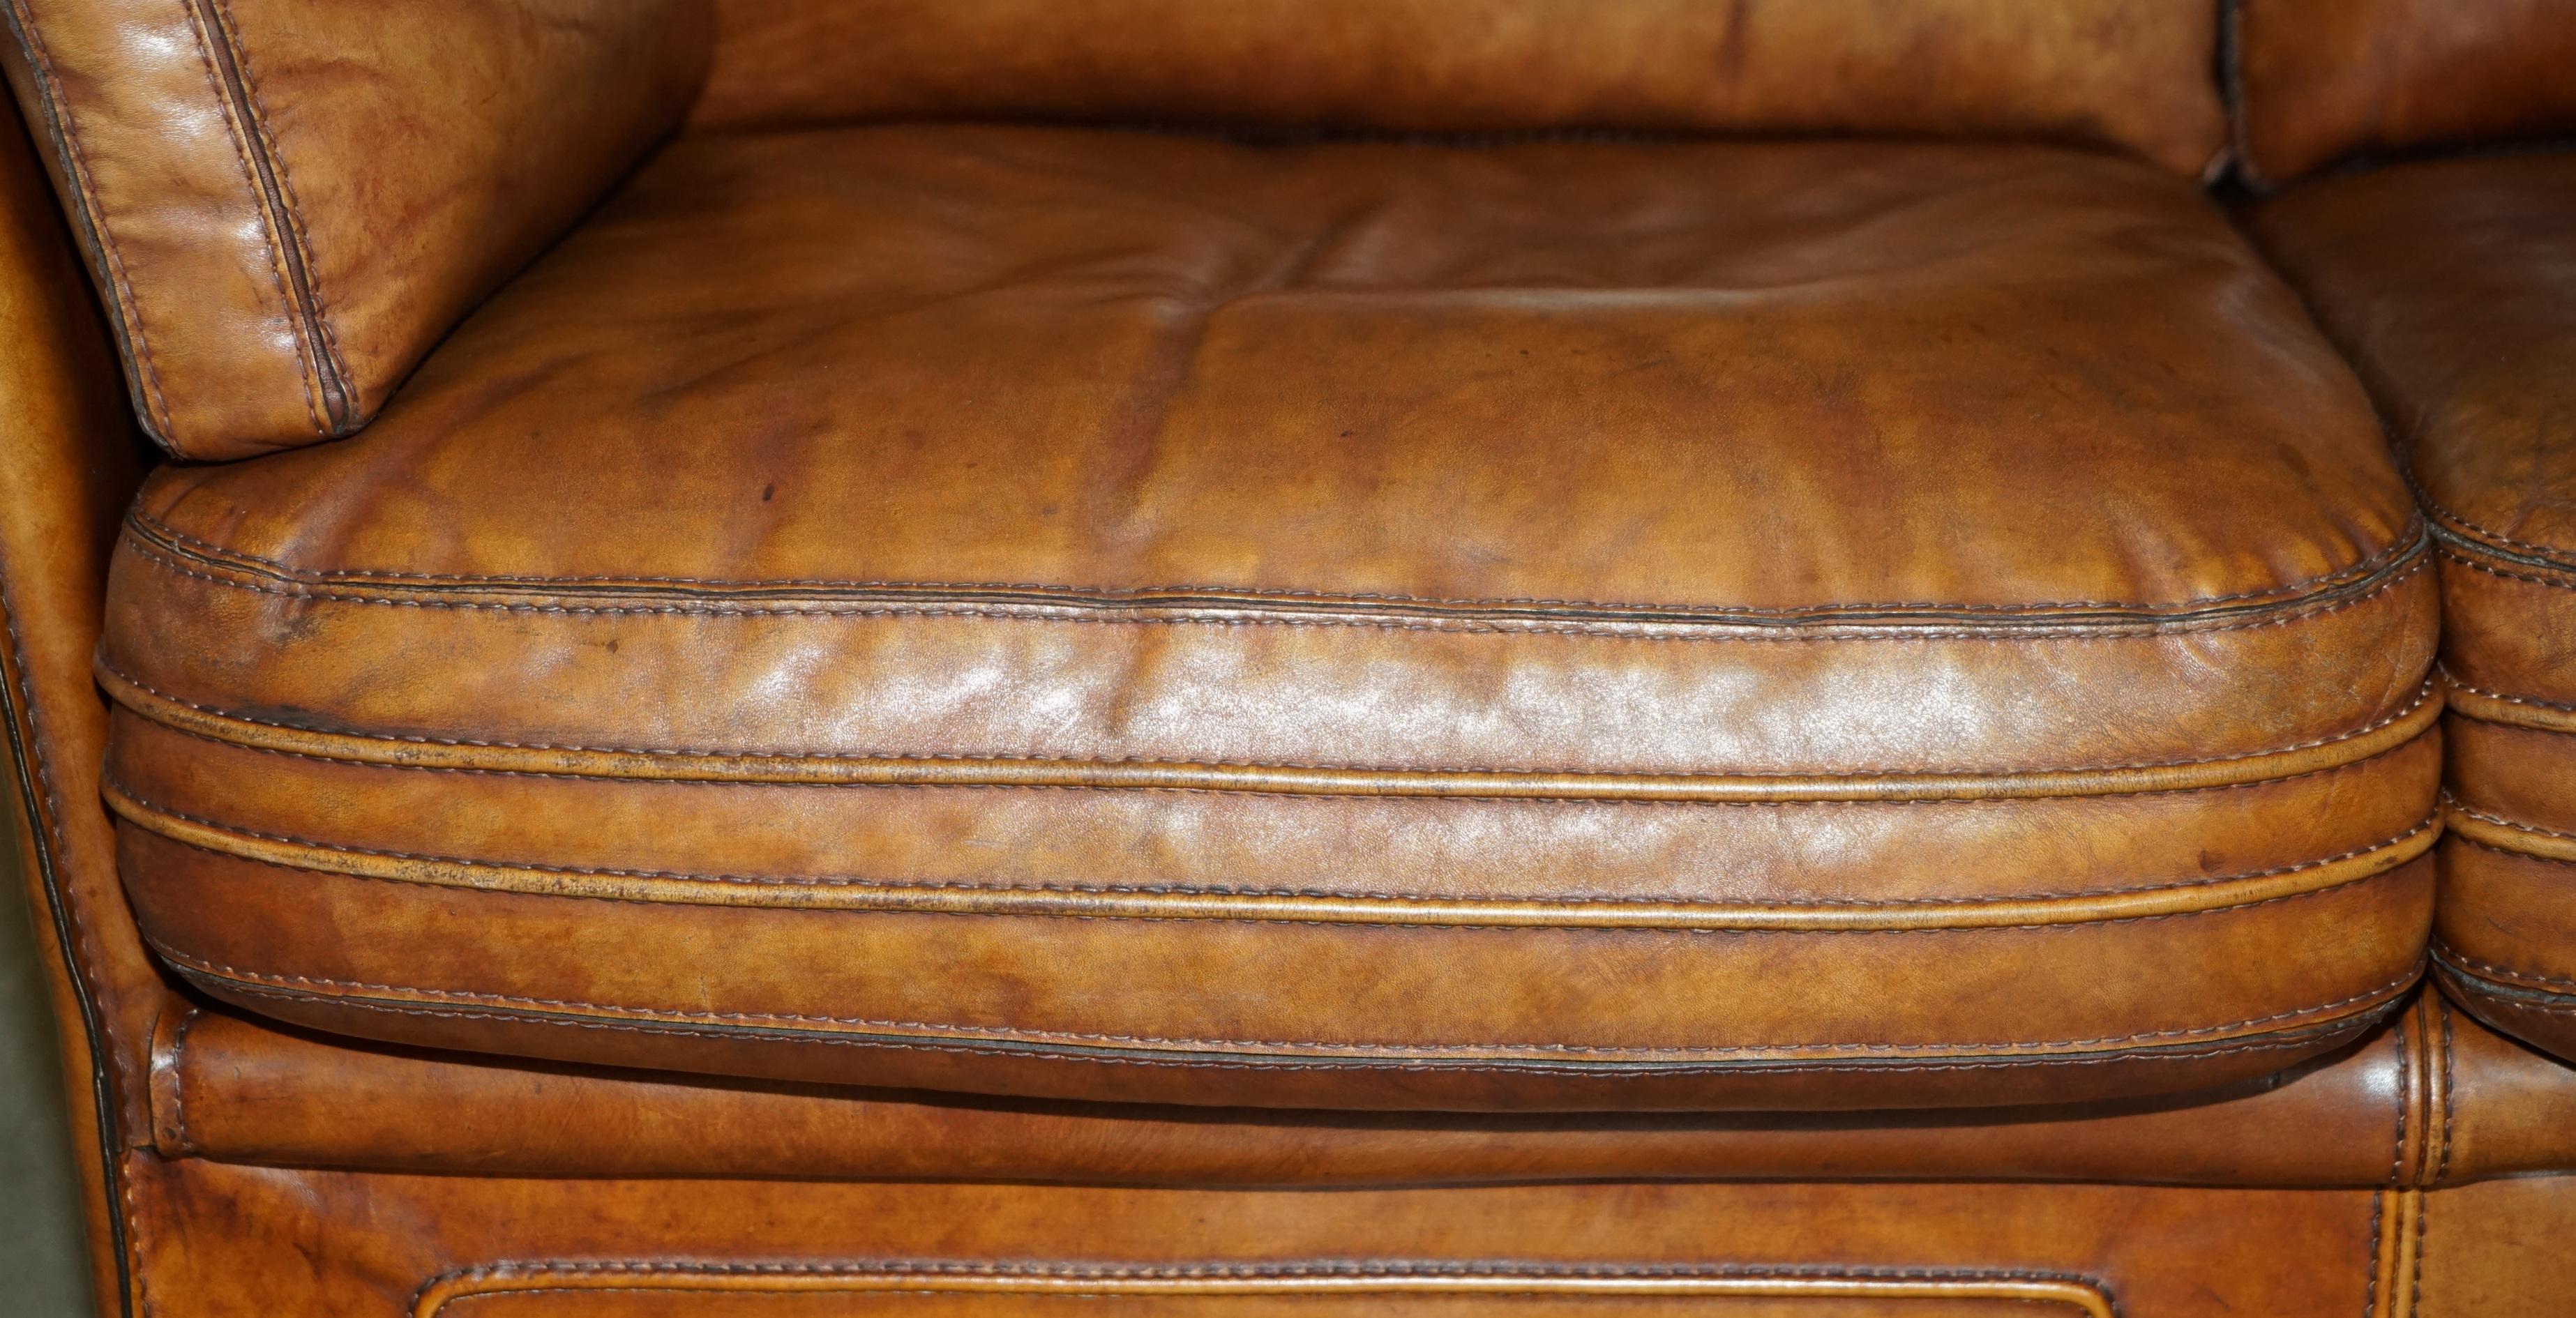 ViNTAGE BROWN LEATHER ROCHE BOBOIS MID CENTURY MODERN CONTEMPORARY SOFA For Sale 1